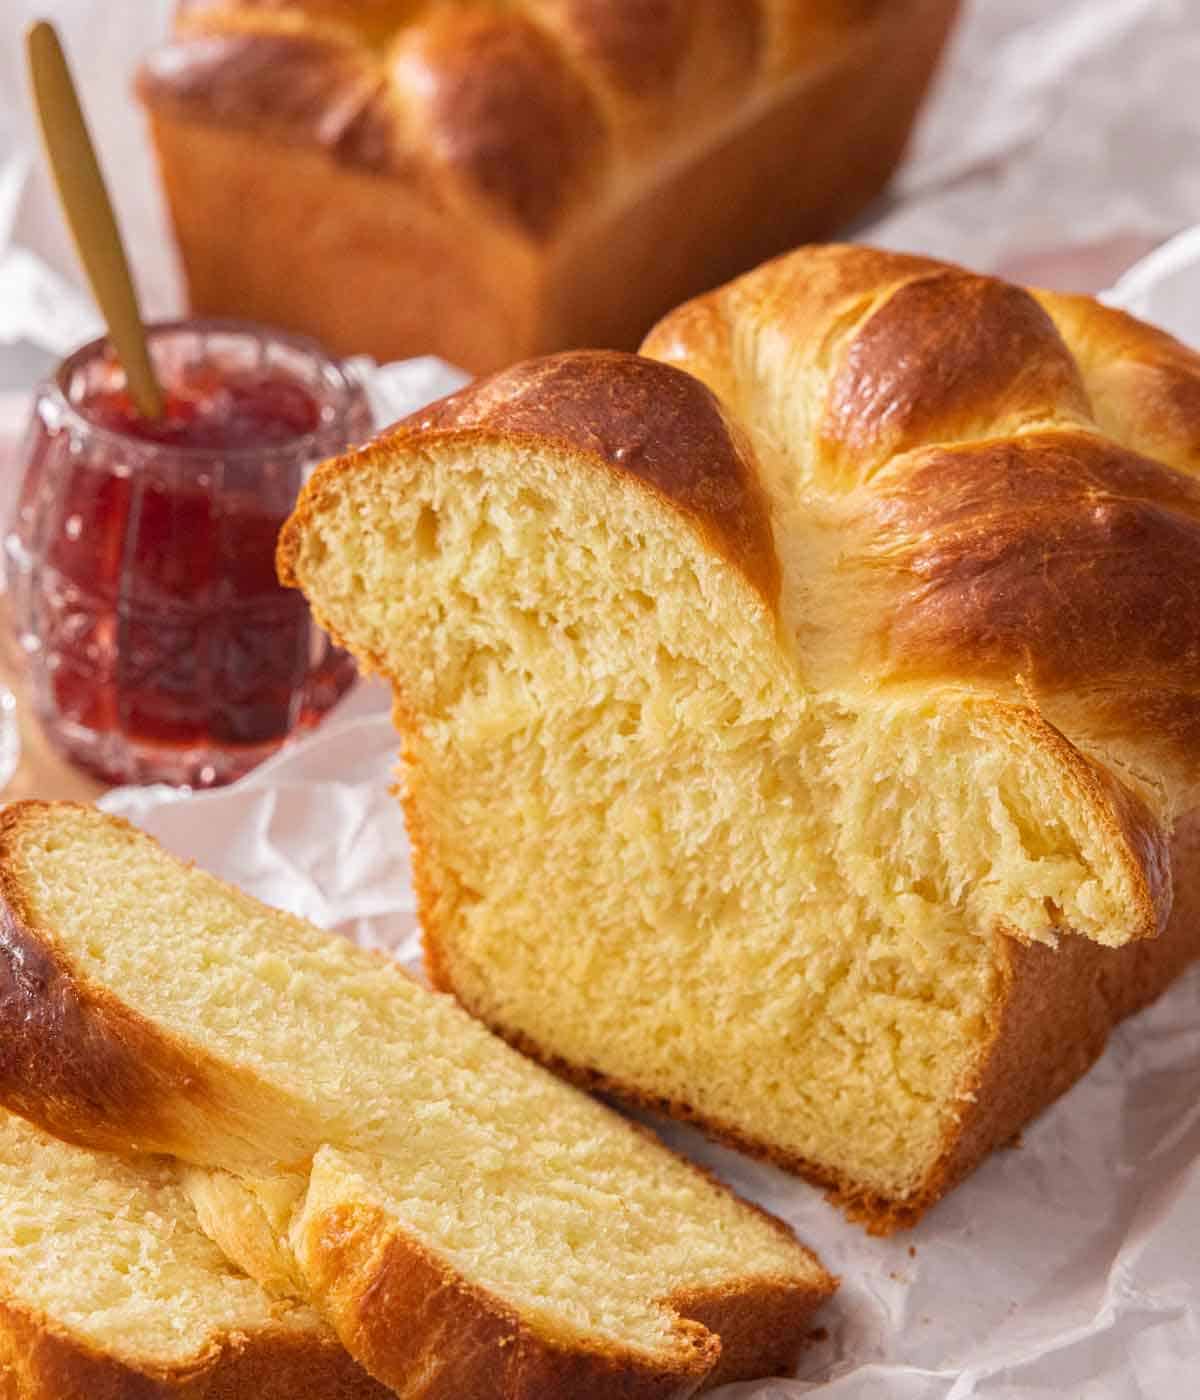 A loaf of sliced brioche bread with a jar of jam in the background.